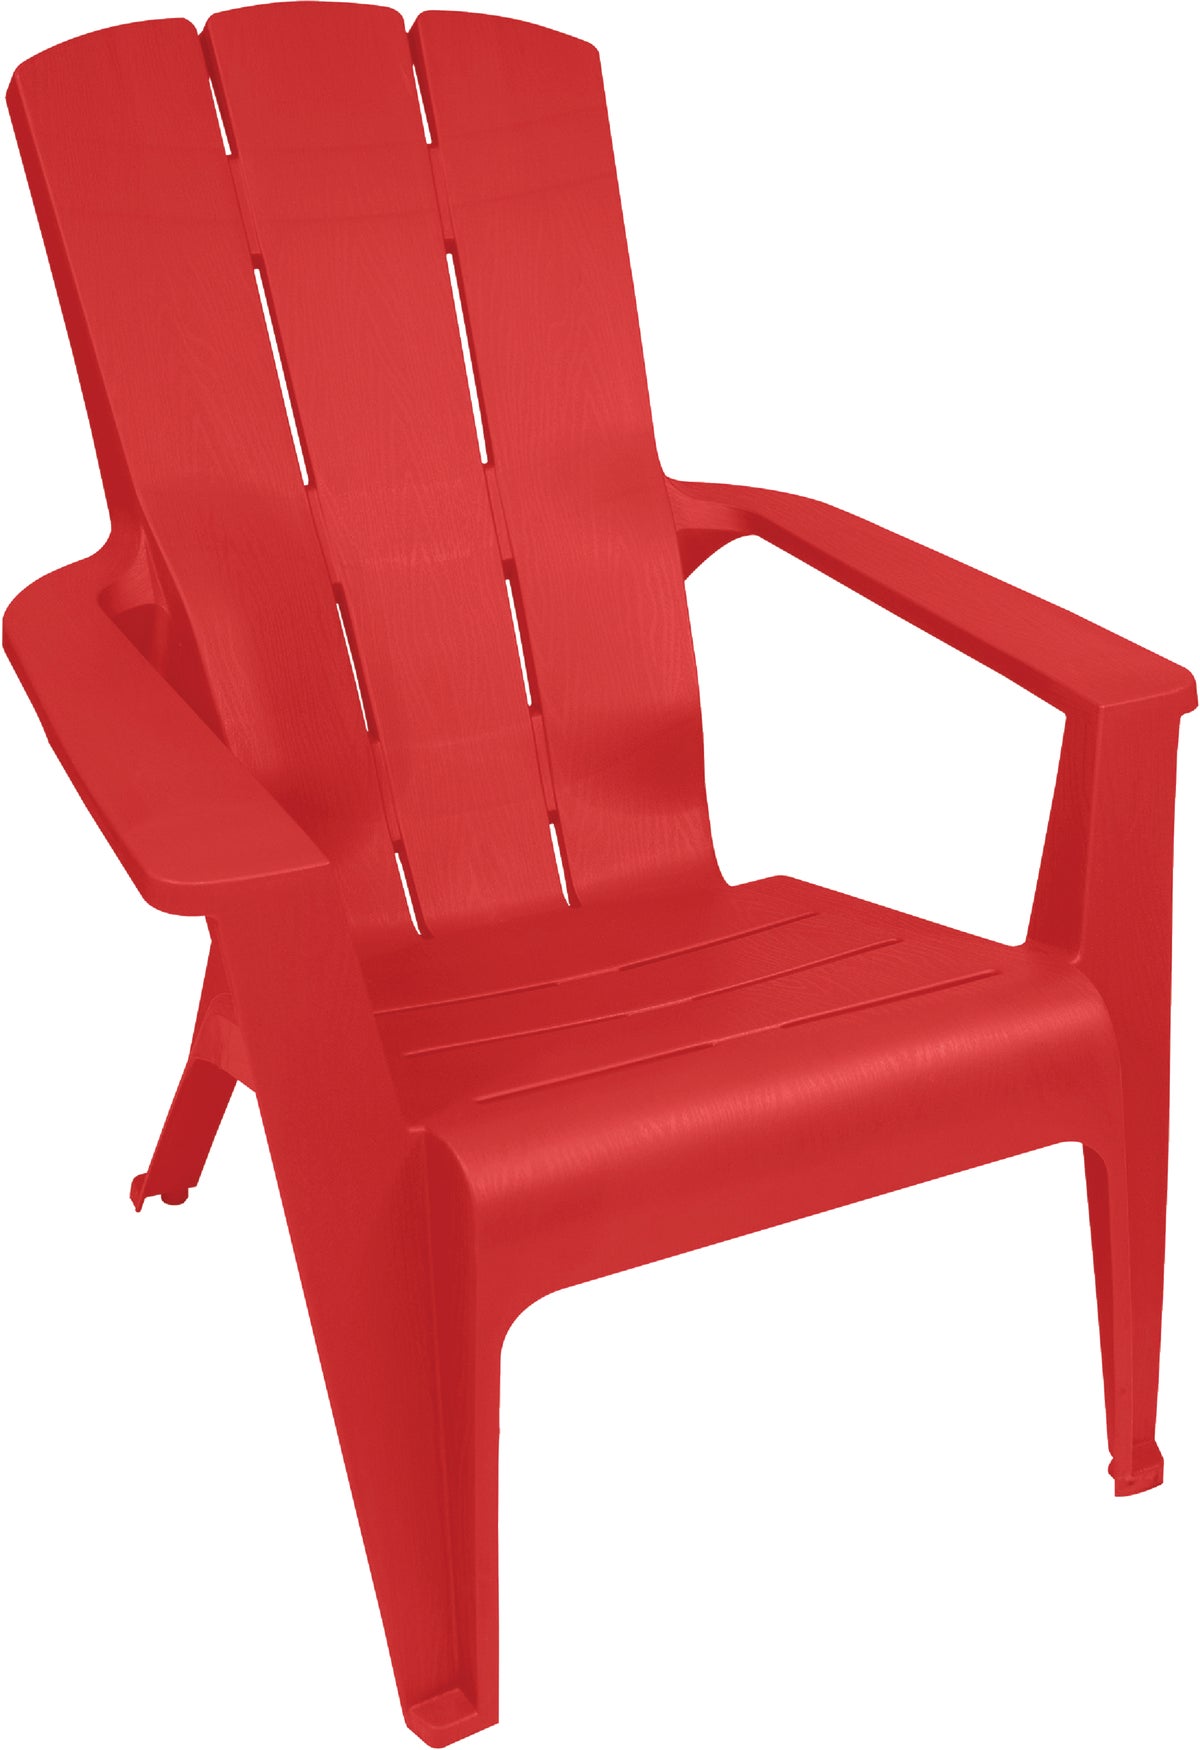 Buy Gracious Living Resin Adirondack Chair Red Explosion